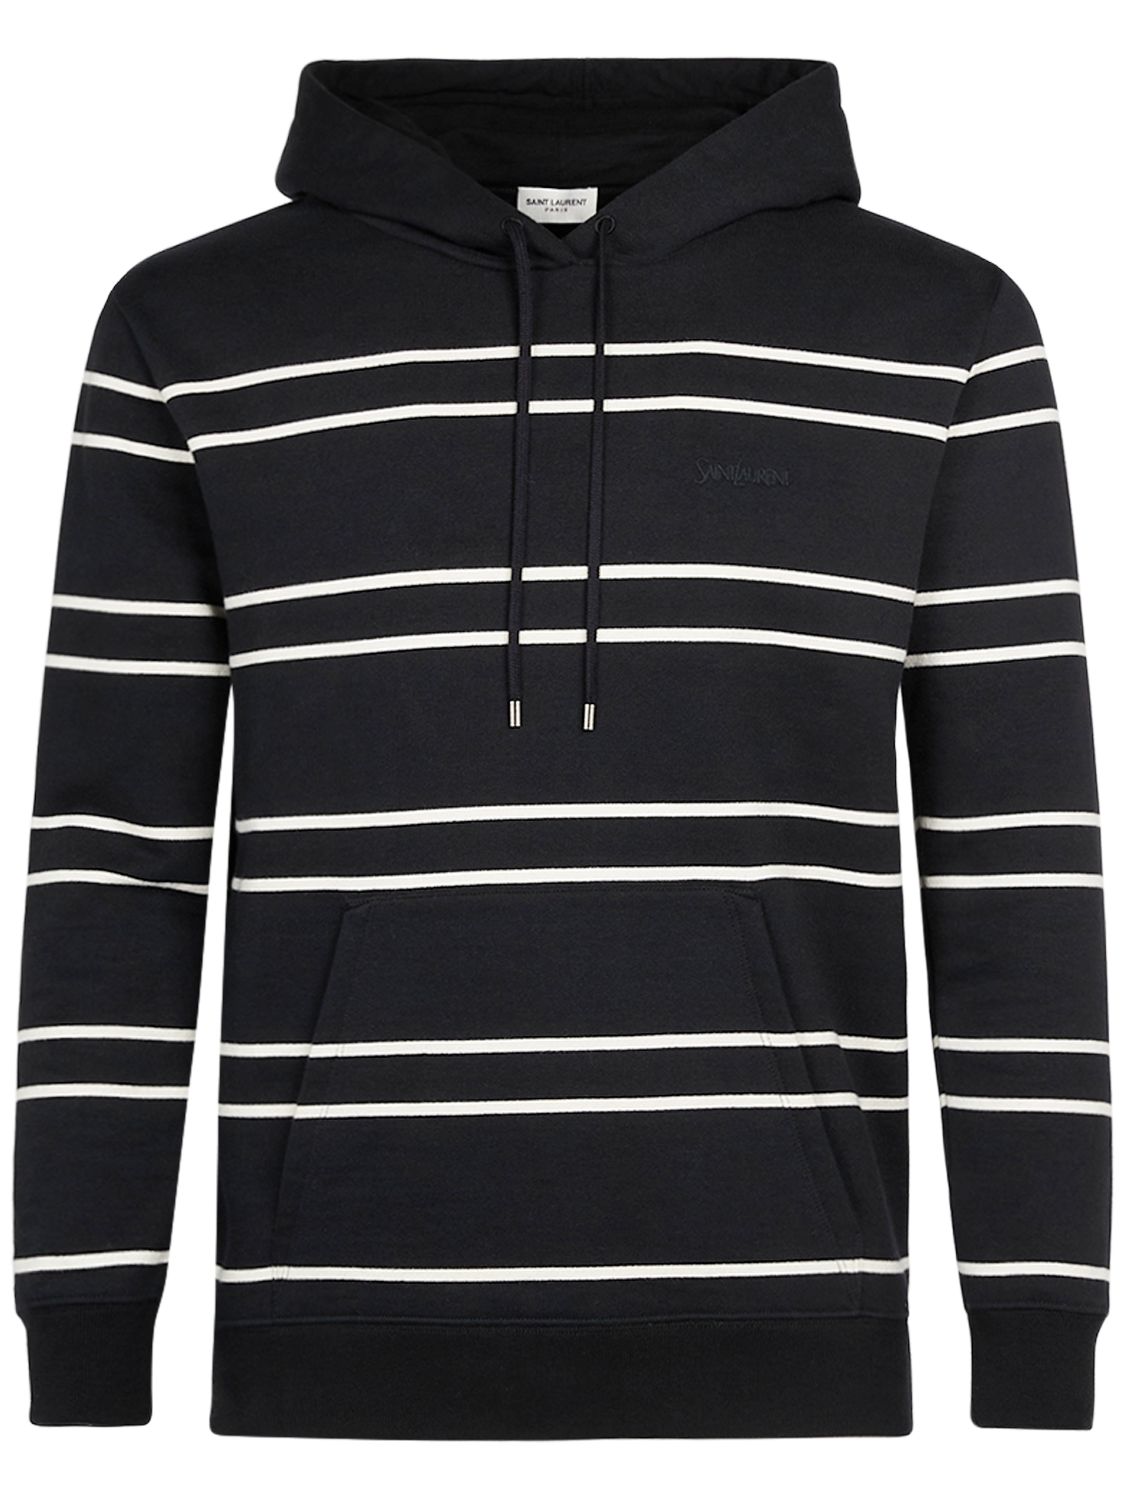 Maddox Old School Striped Cotton Hoodie